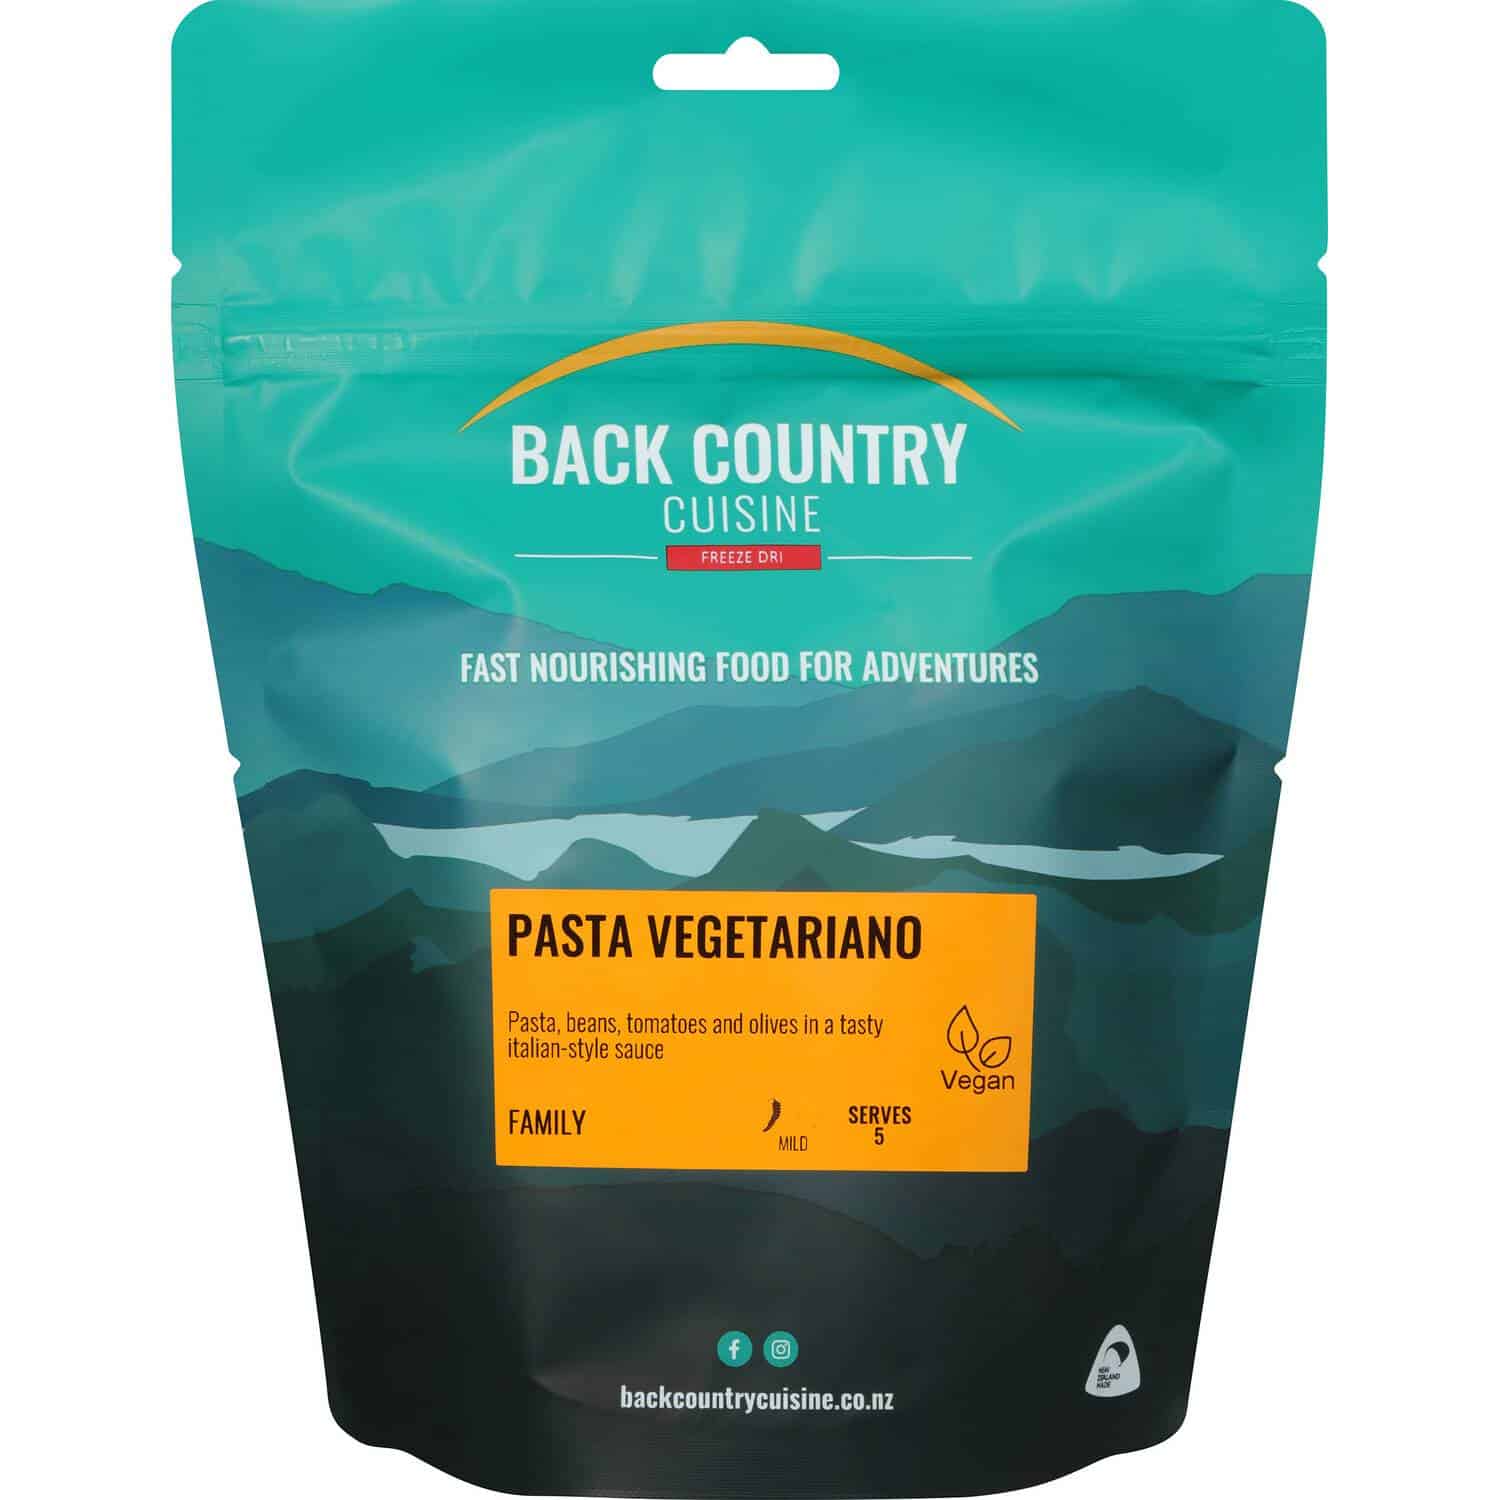 Back Country Cuisine Pasta Vegetariano Family - Tramping Food and Accessories sold by Venture Outdoors NZ